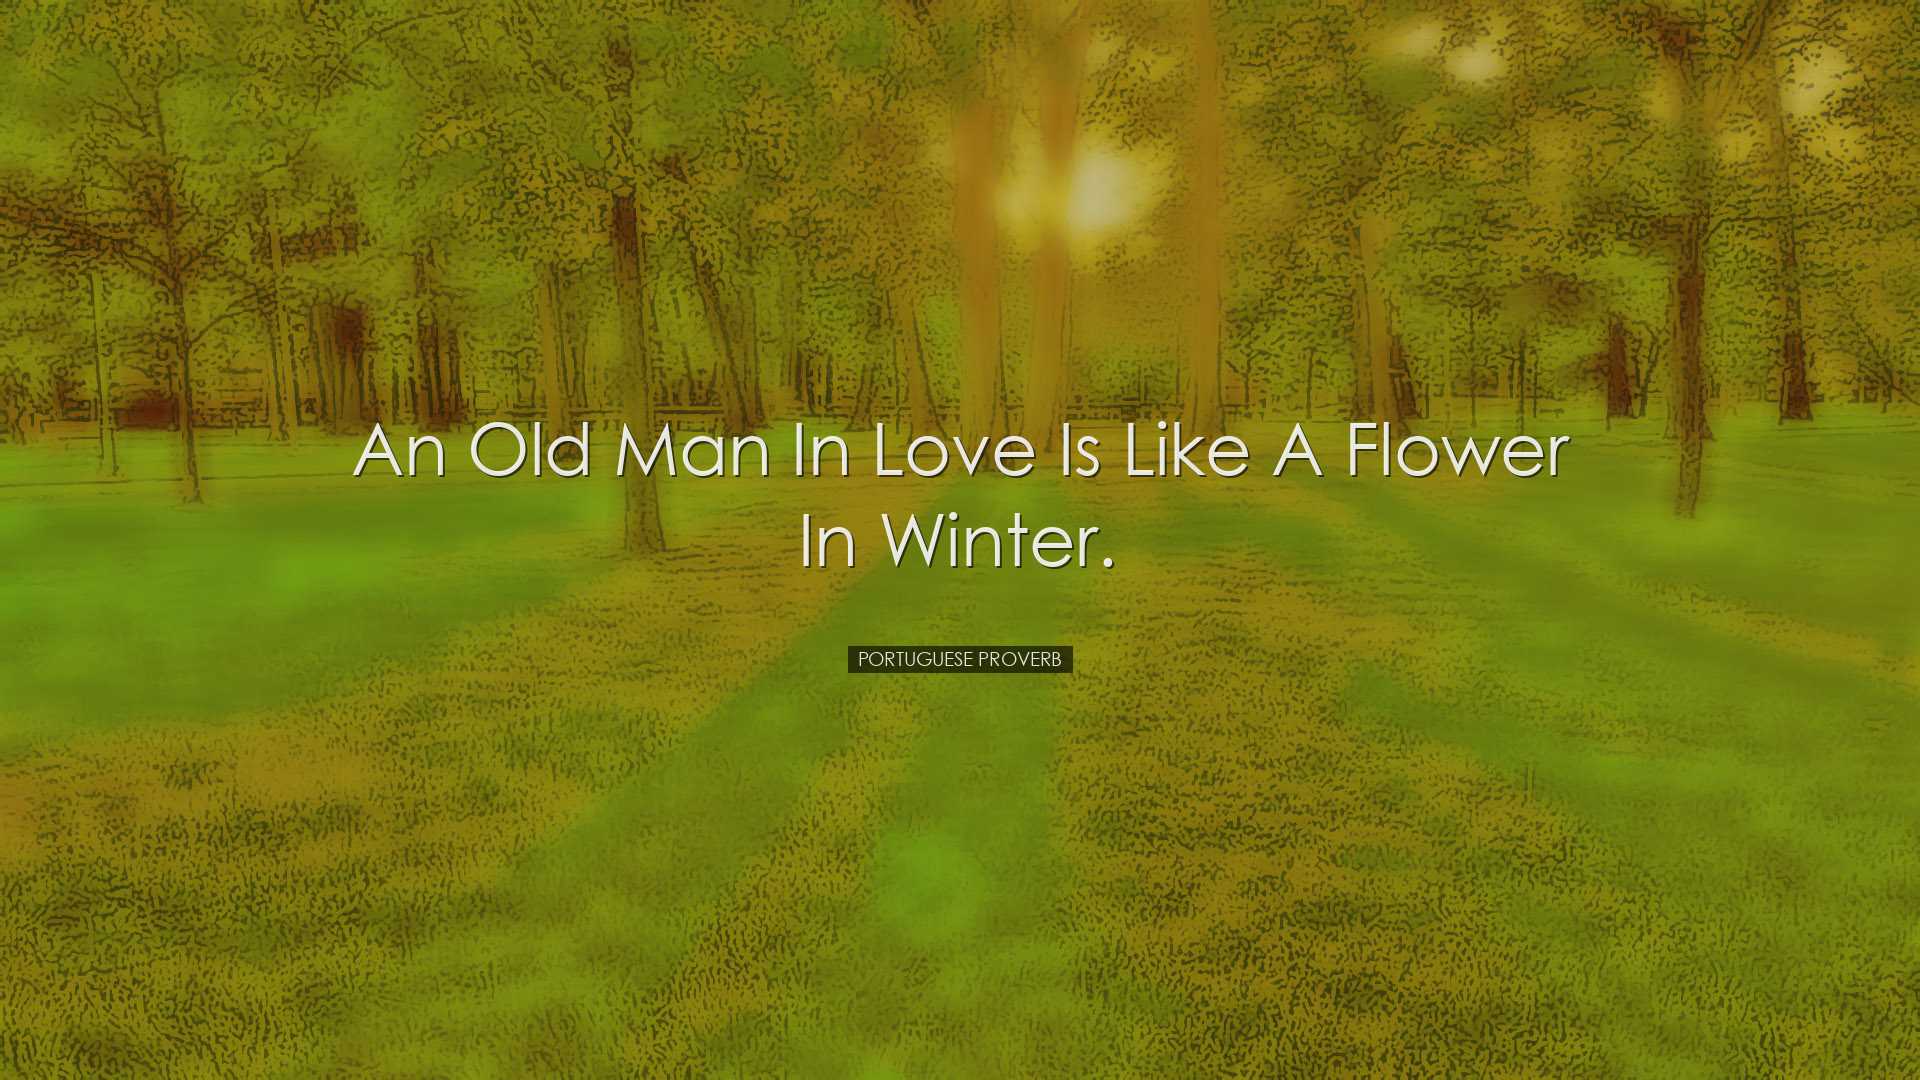 An old man in love is like a flower in winter. - Portuguese Prover